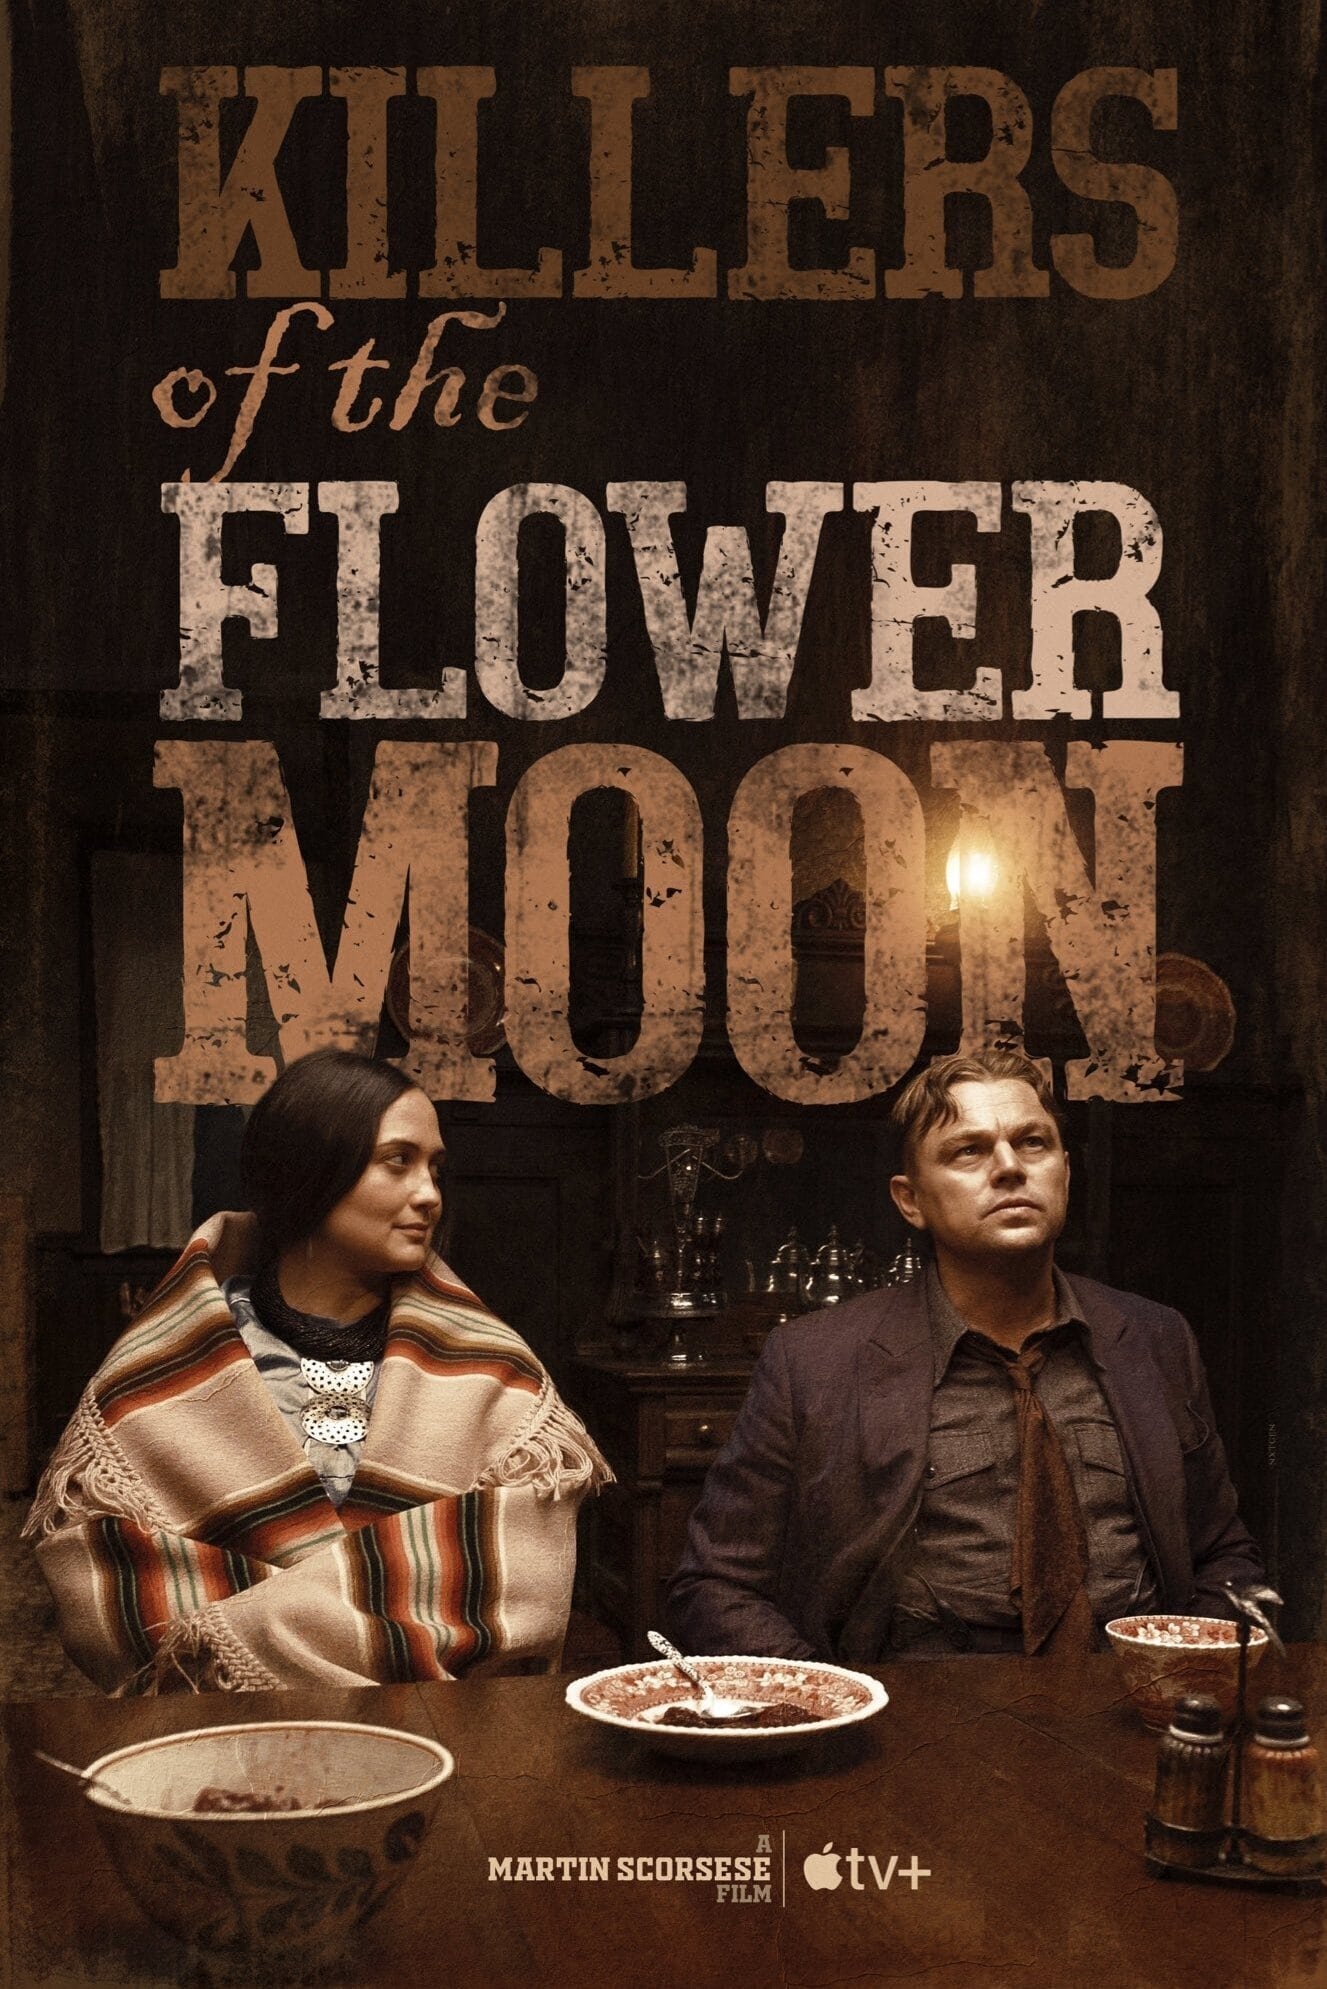 christian movie review killers of the flower moon